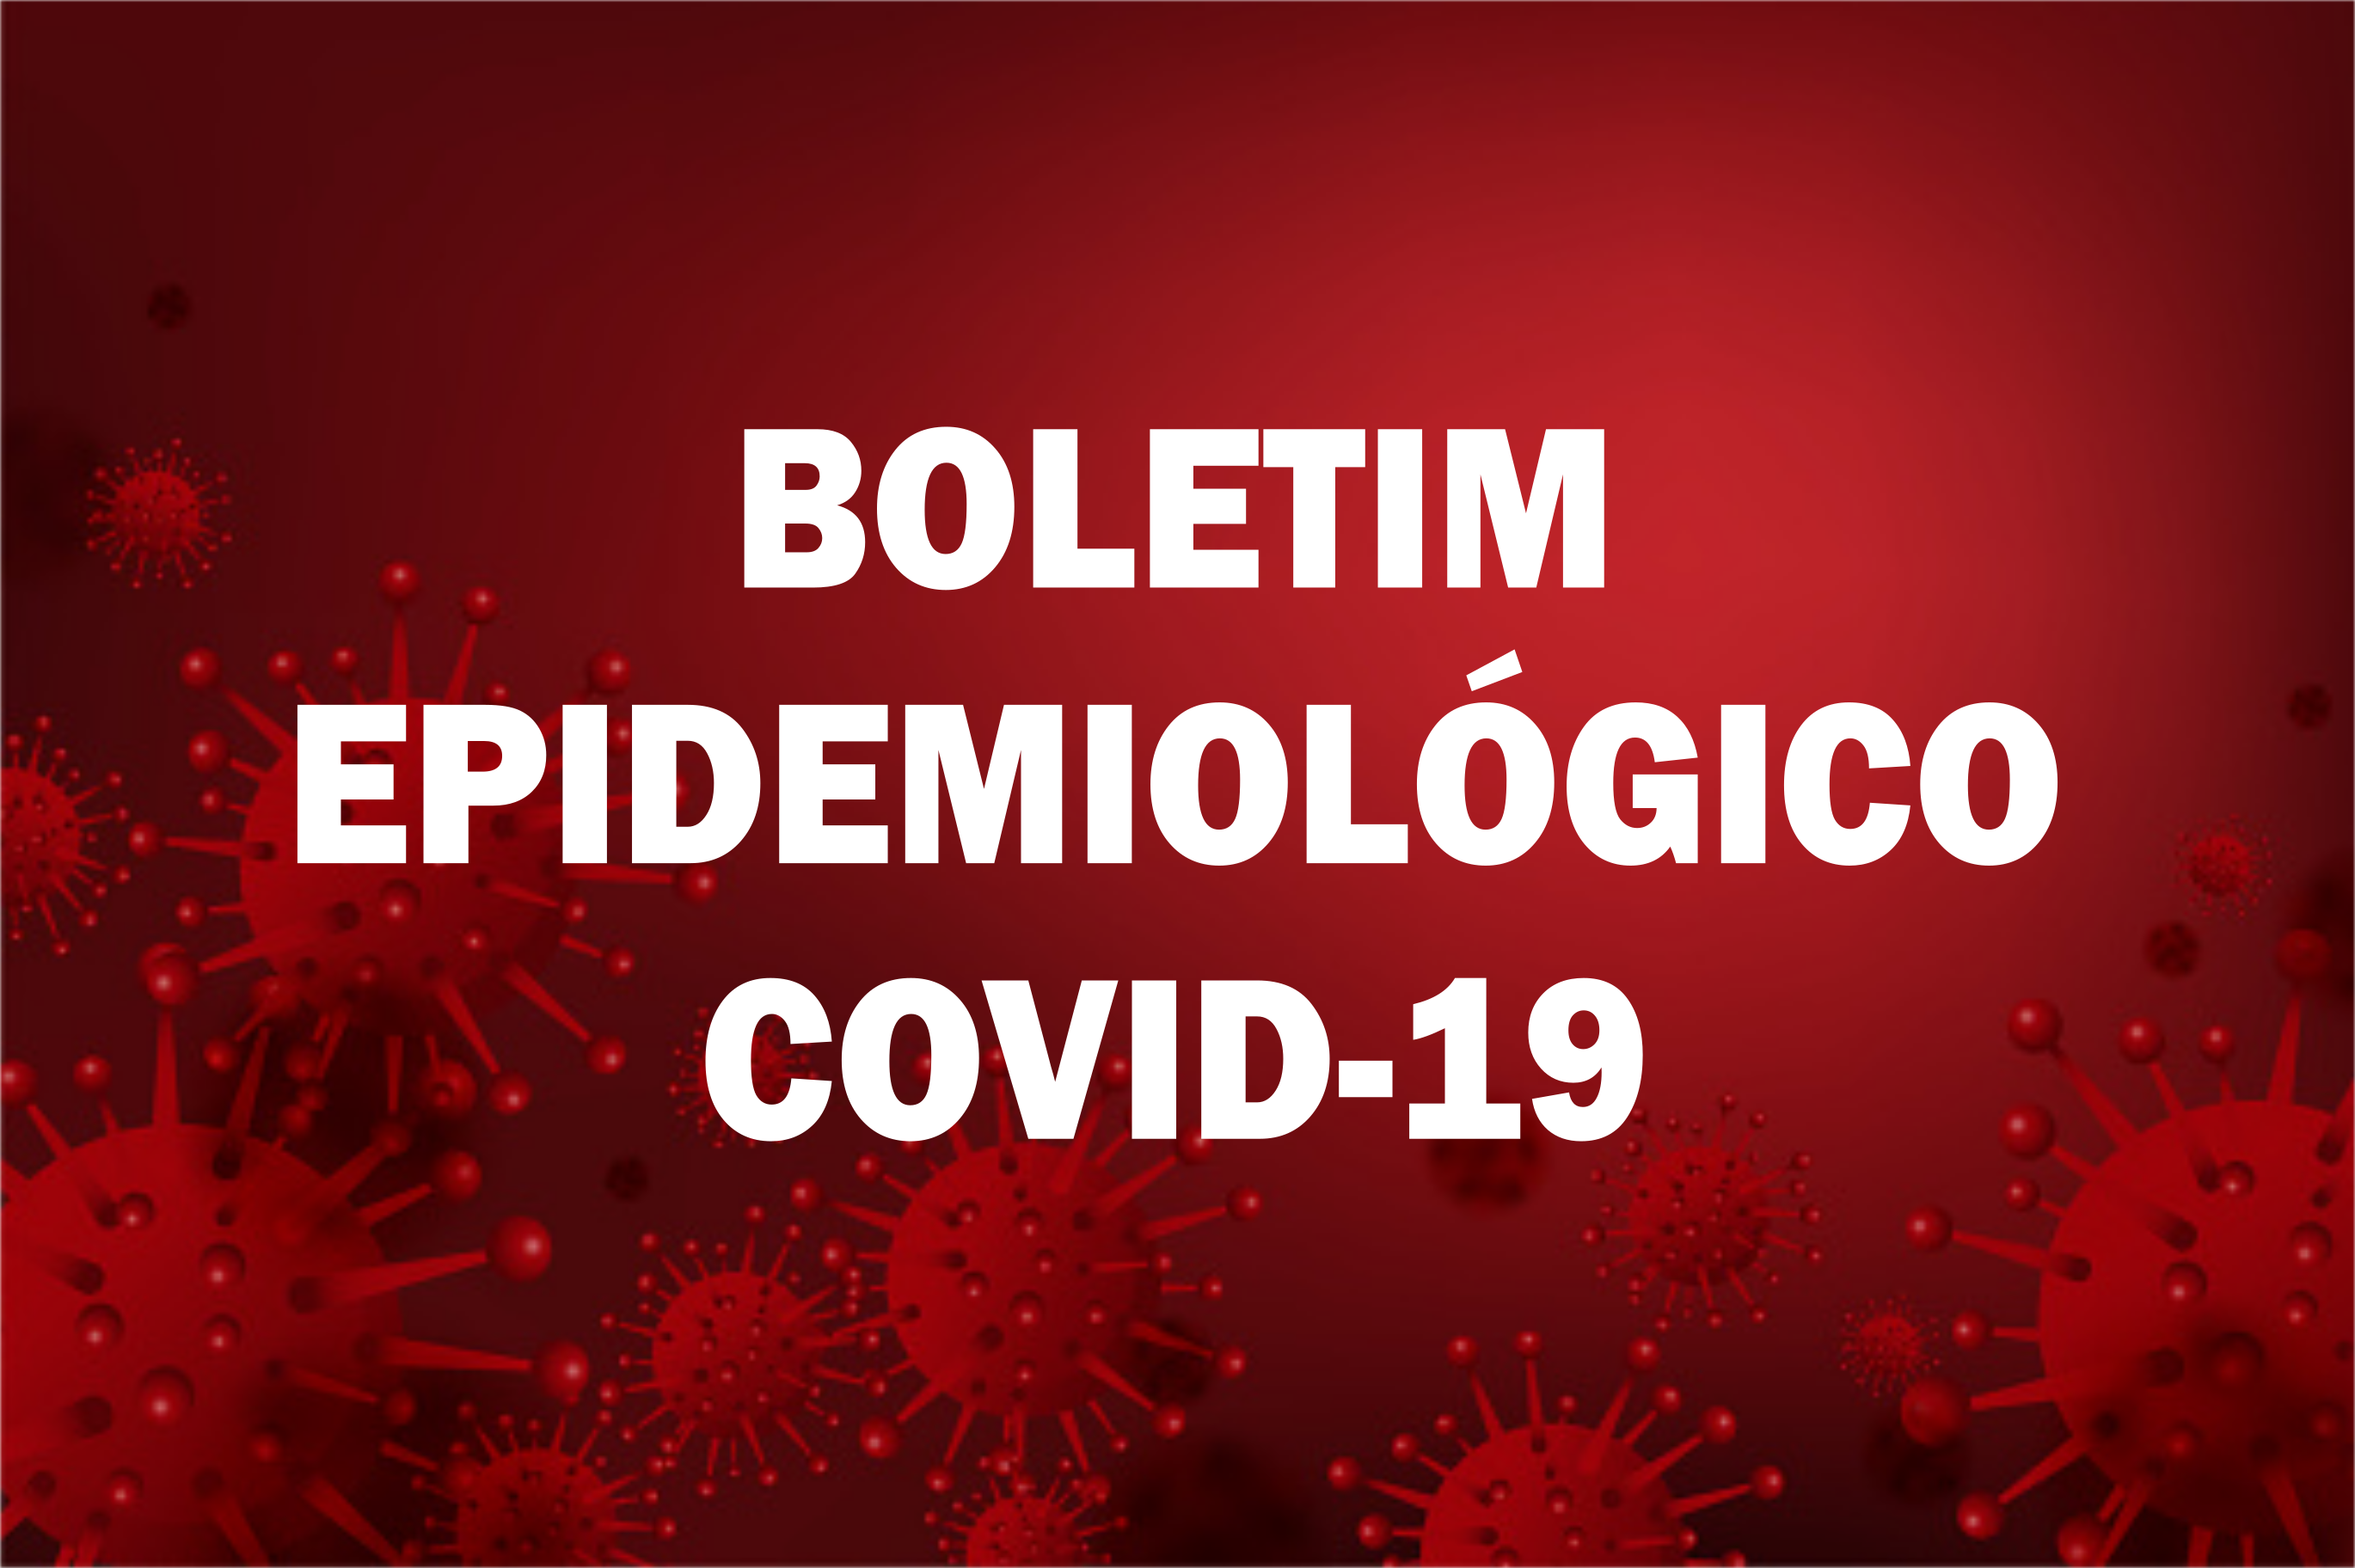 You are currently viewing BOLETIM EPIDEMIOLÓGICO Nº 140 (COVID-19)